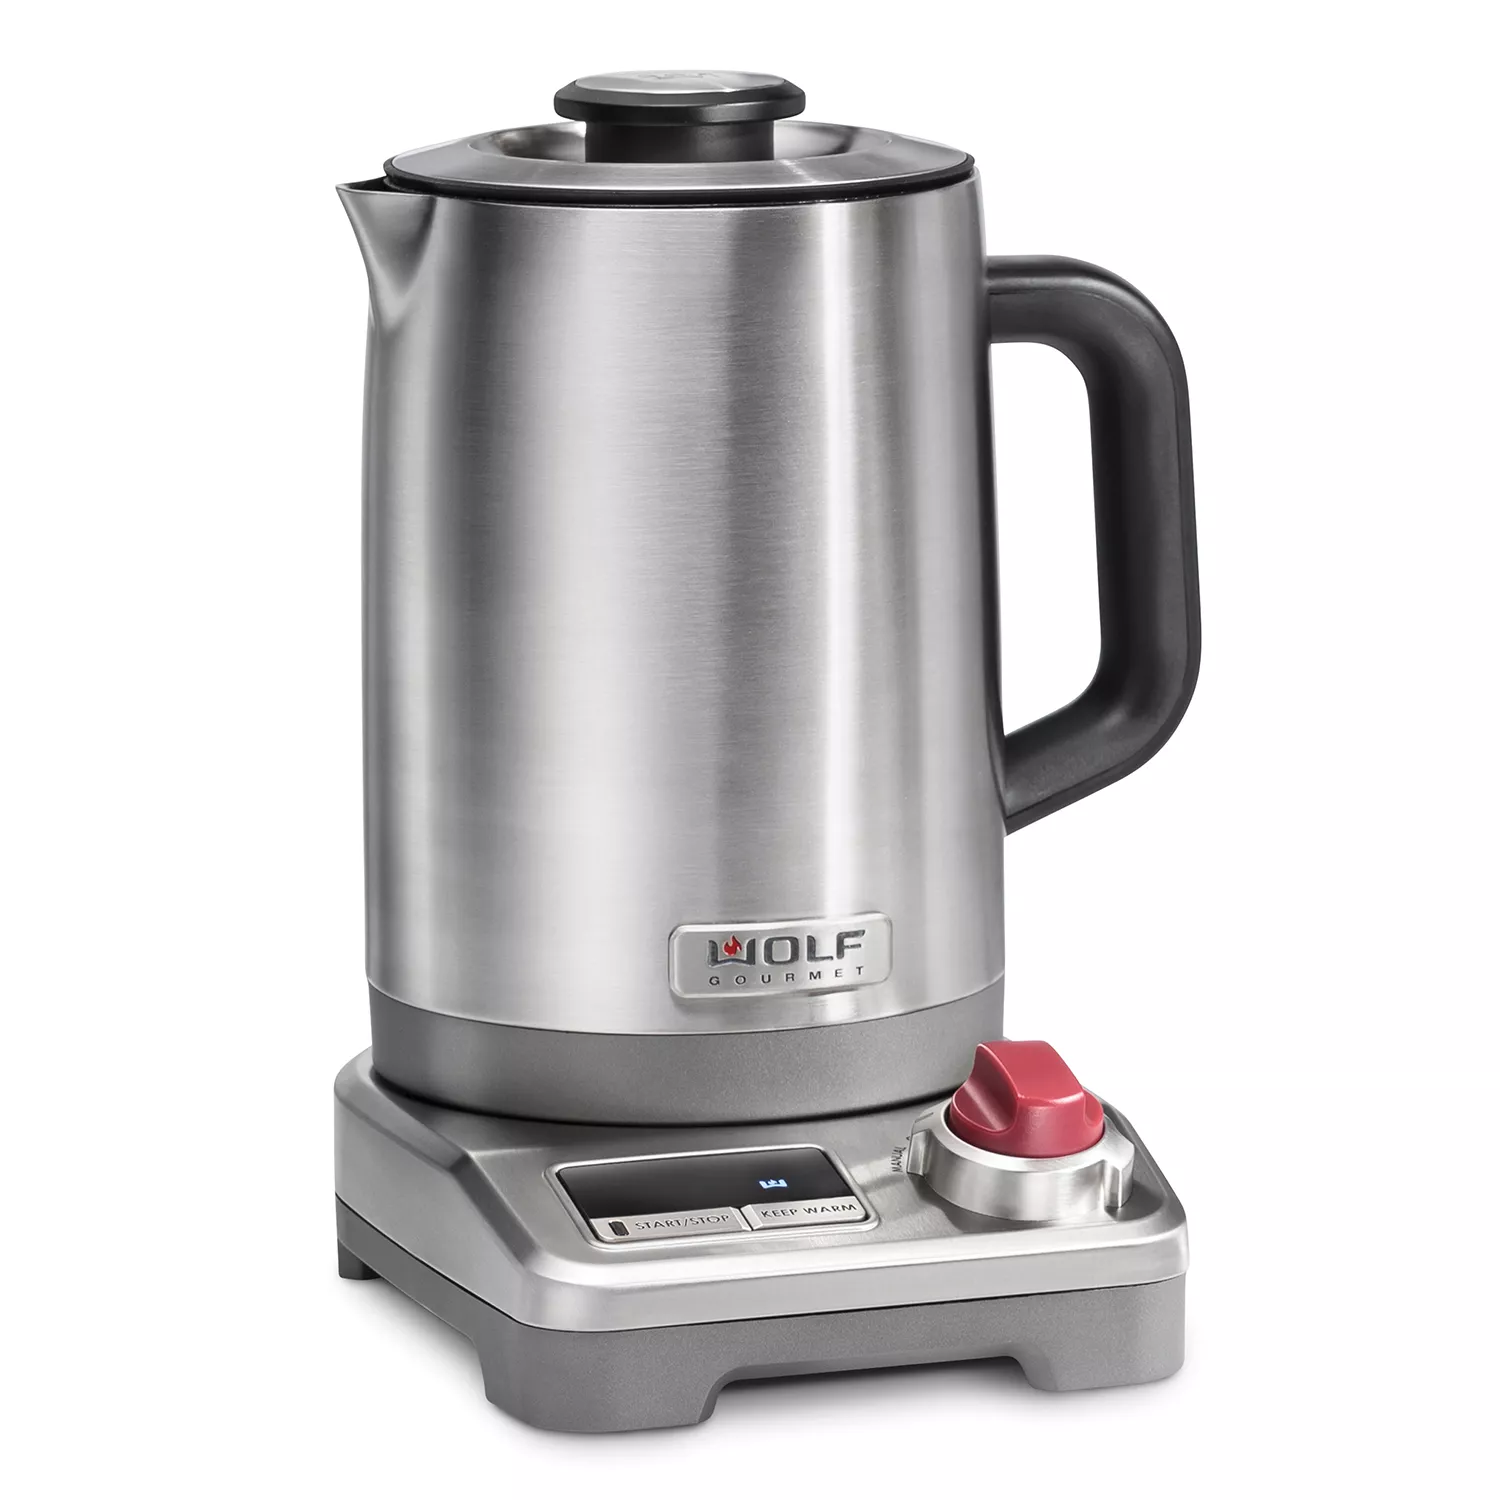 USED Breville IQ Electric Kettle, Brushed Stainless Steel